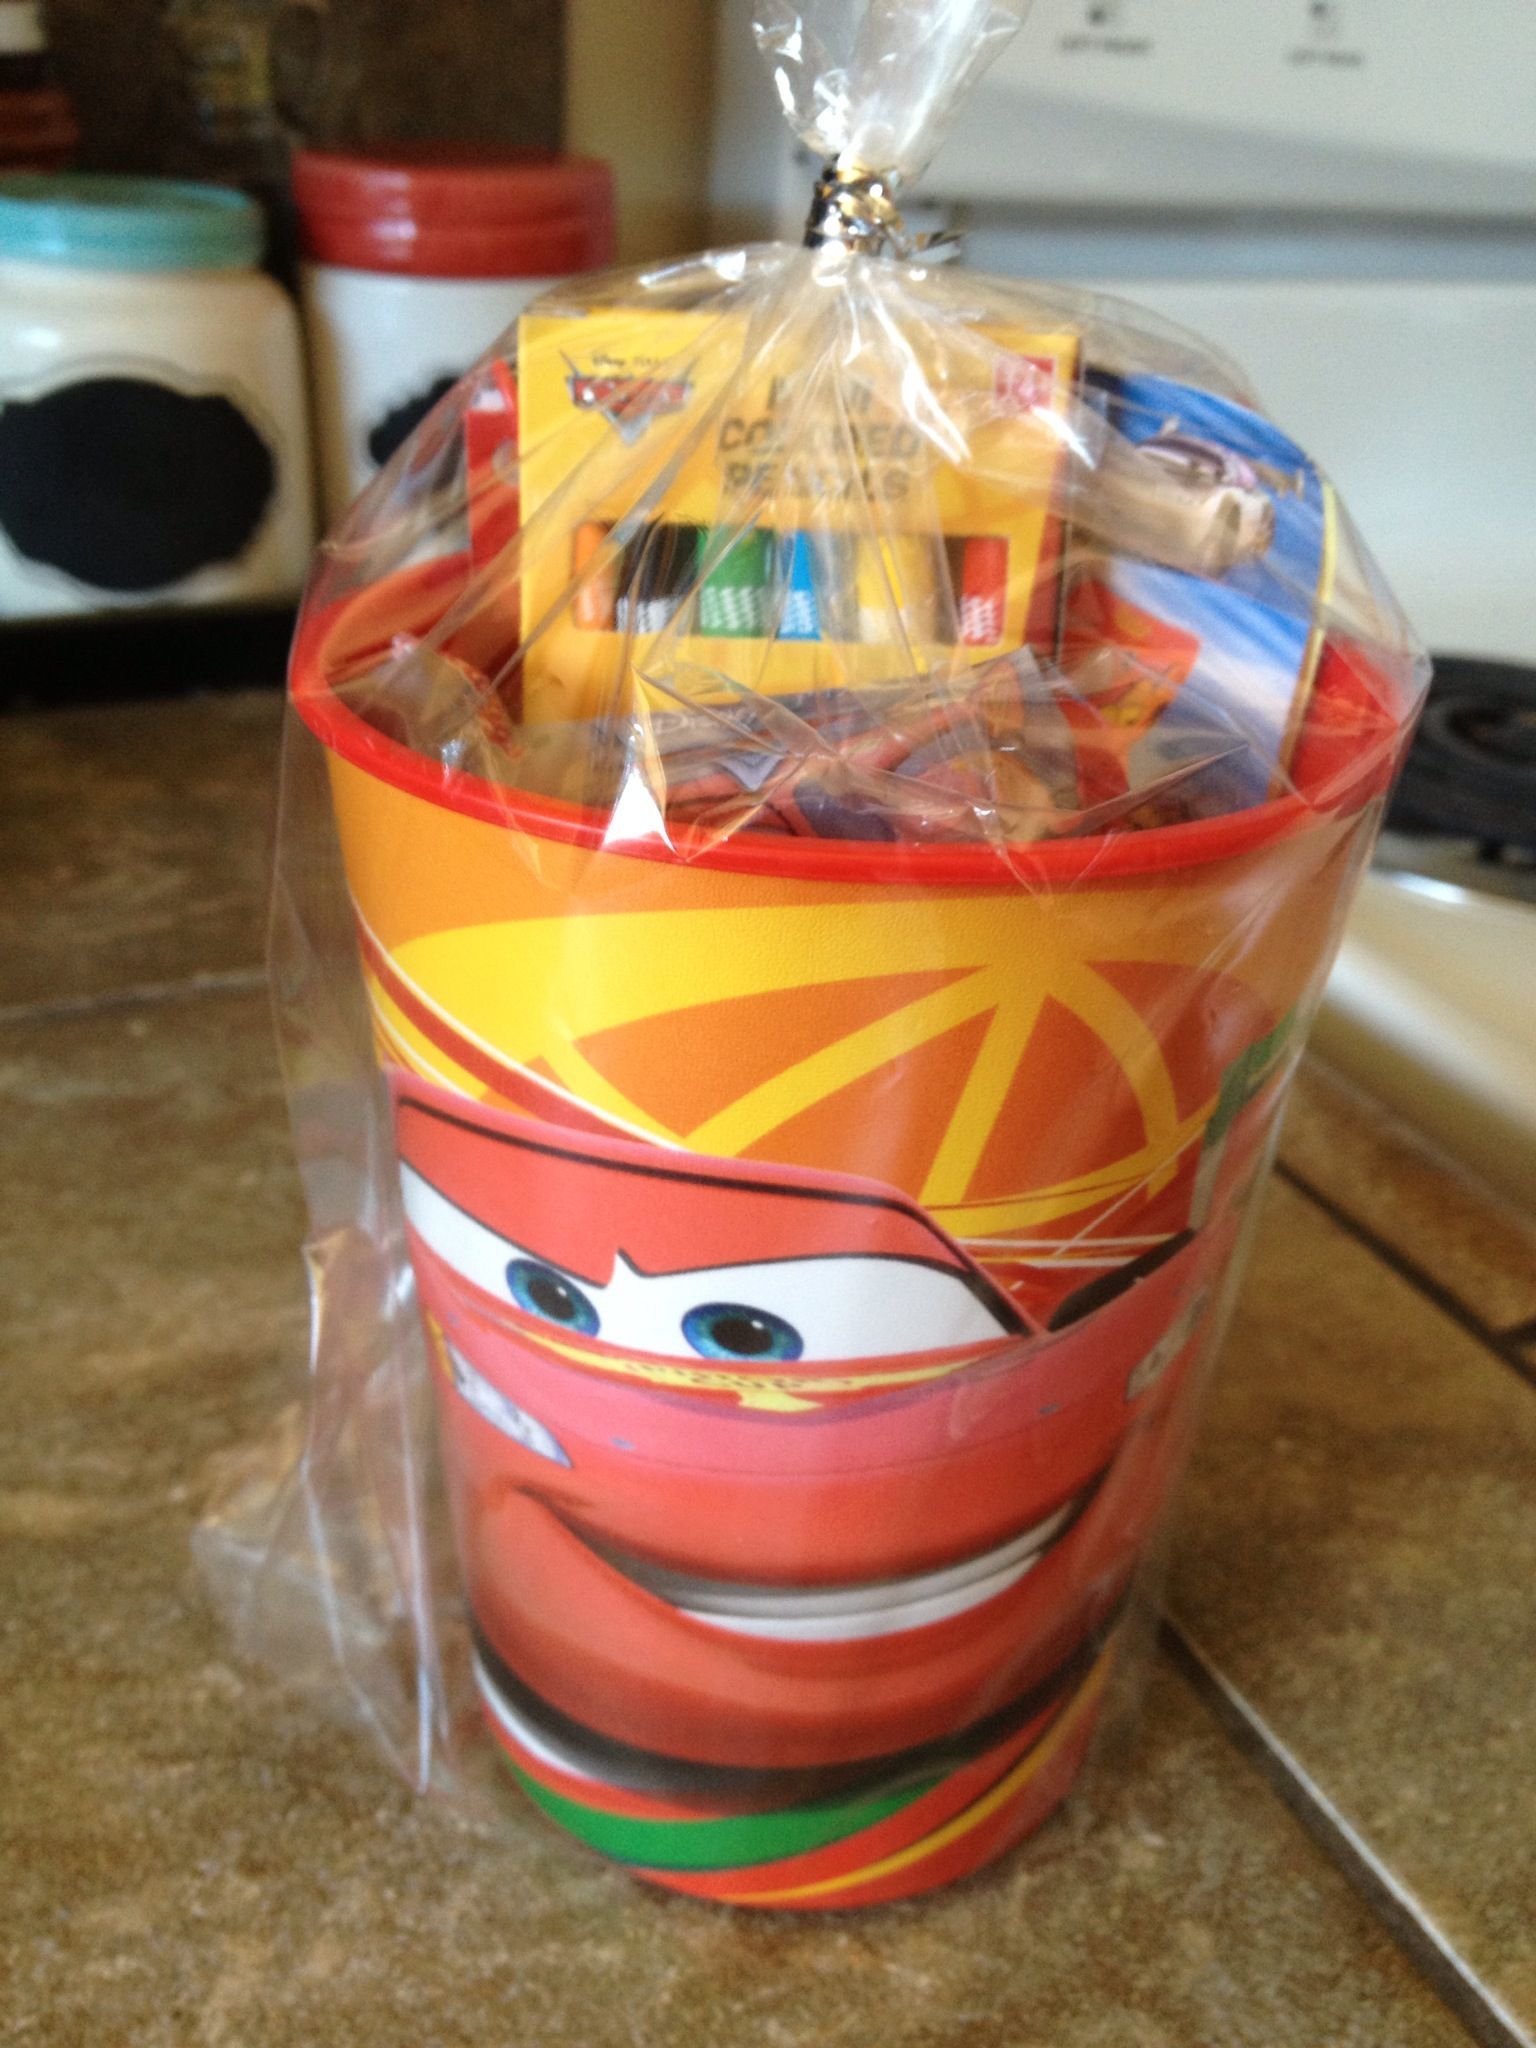 Cars birthday party favor. Plastic cars cup from target filled it with cars crayons, cars notepad, cars st